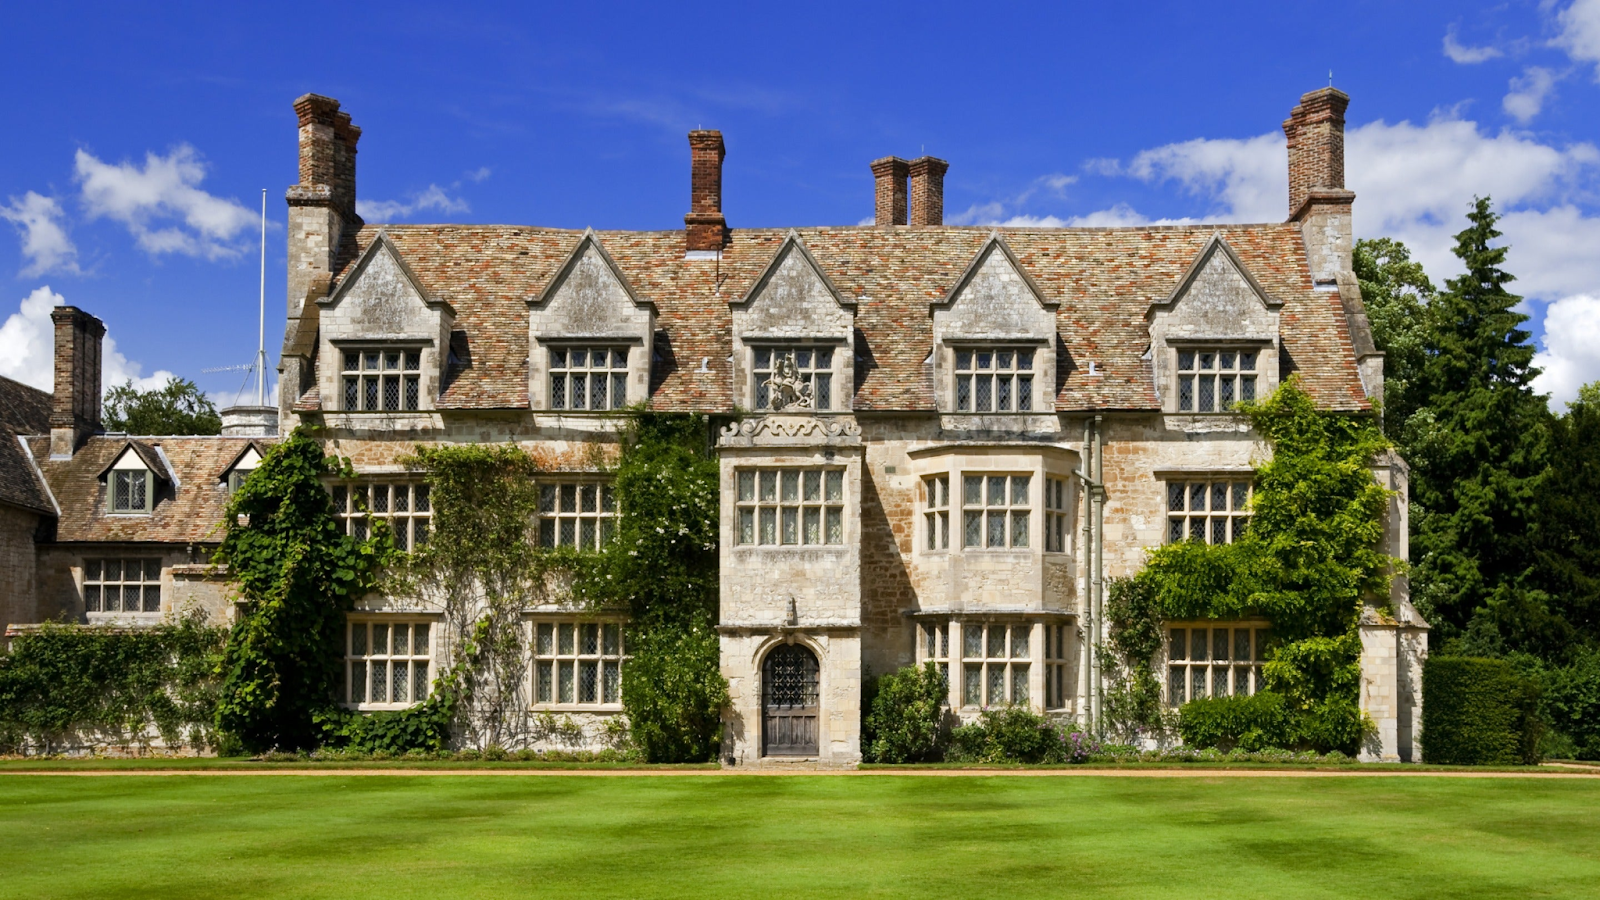 An image showing Anglesey Abbey, a National Trust site